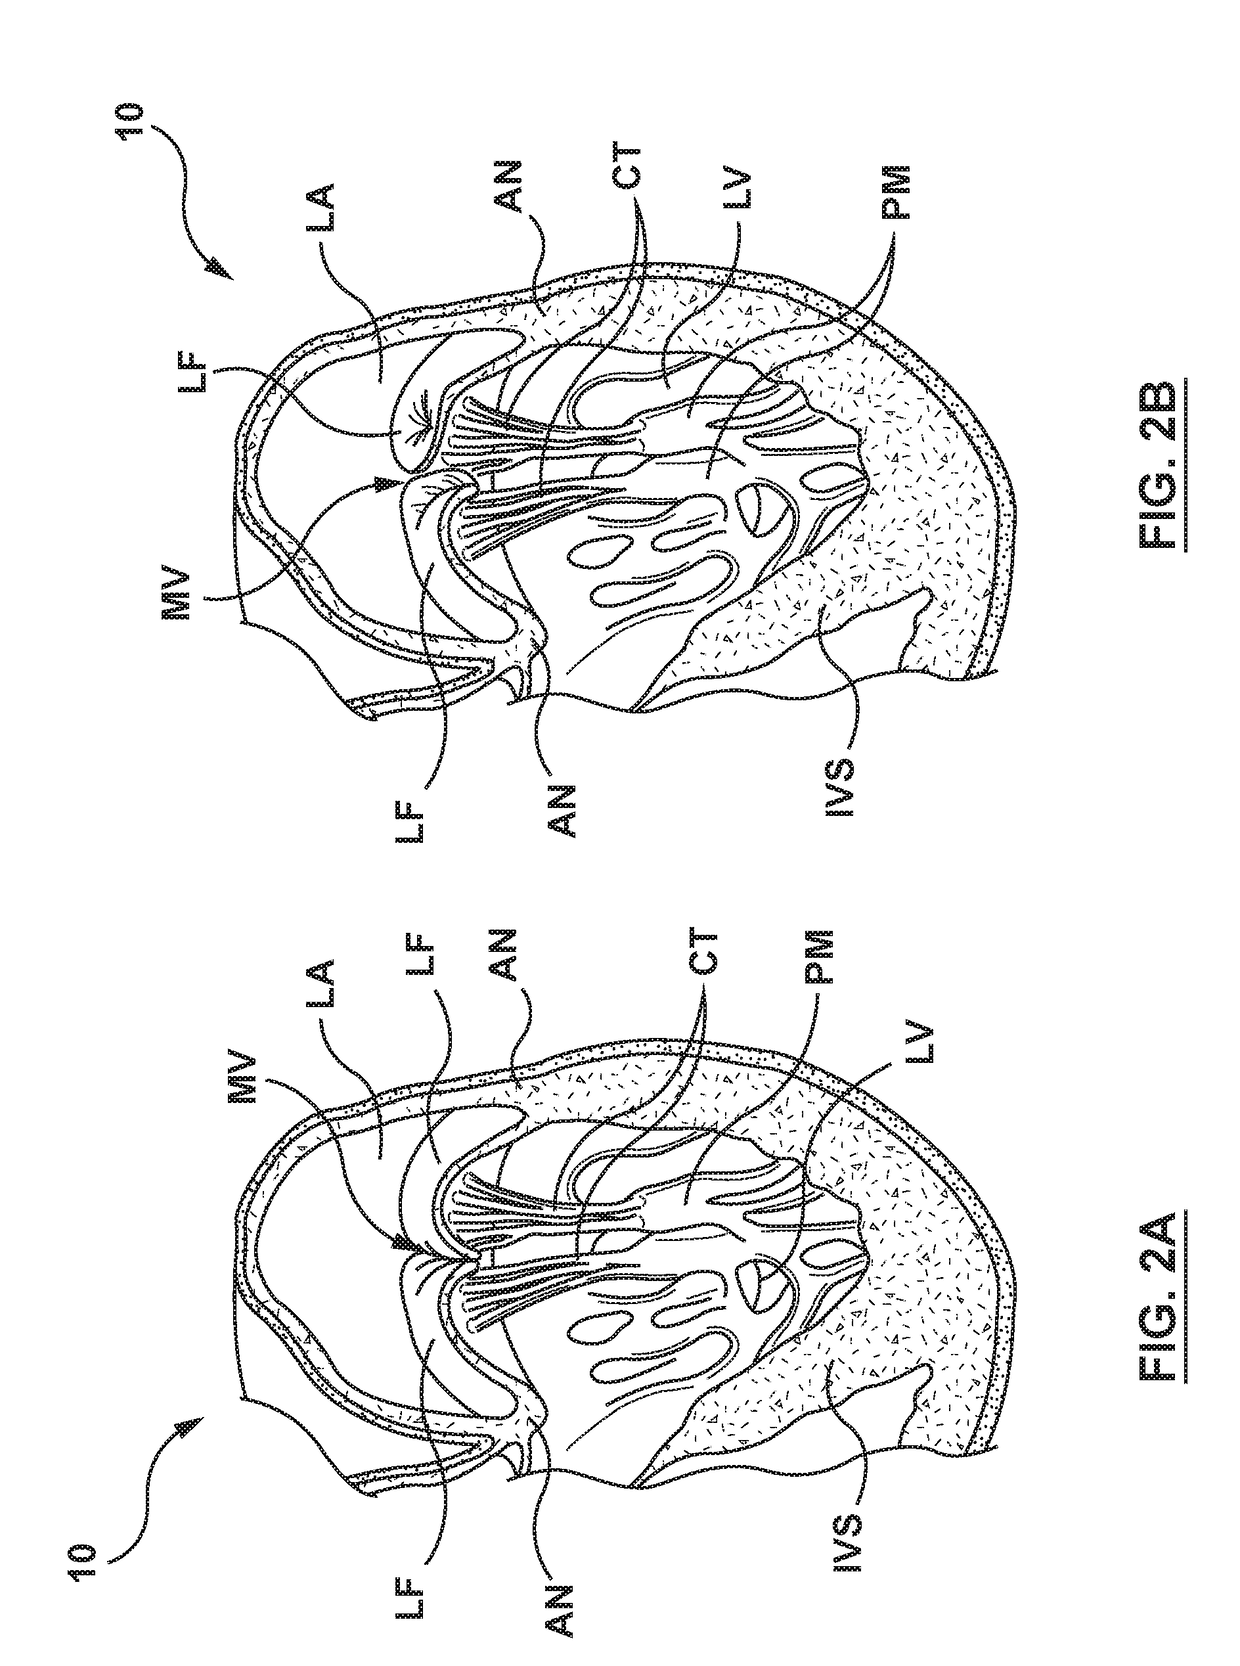 Heart valve prostheses having multiple support arms and methods for percutaneous heart valve replacement